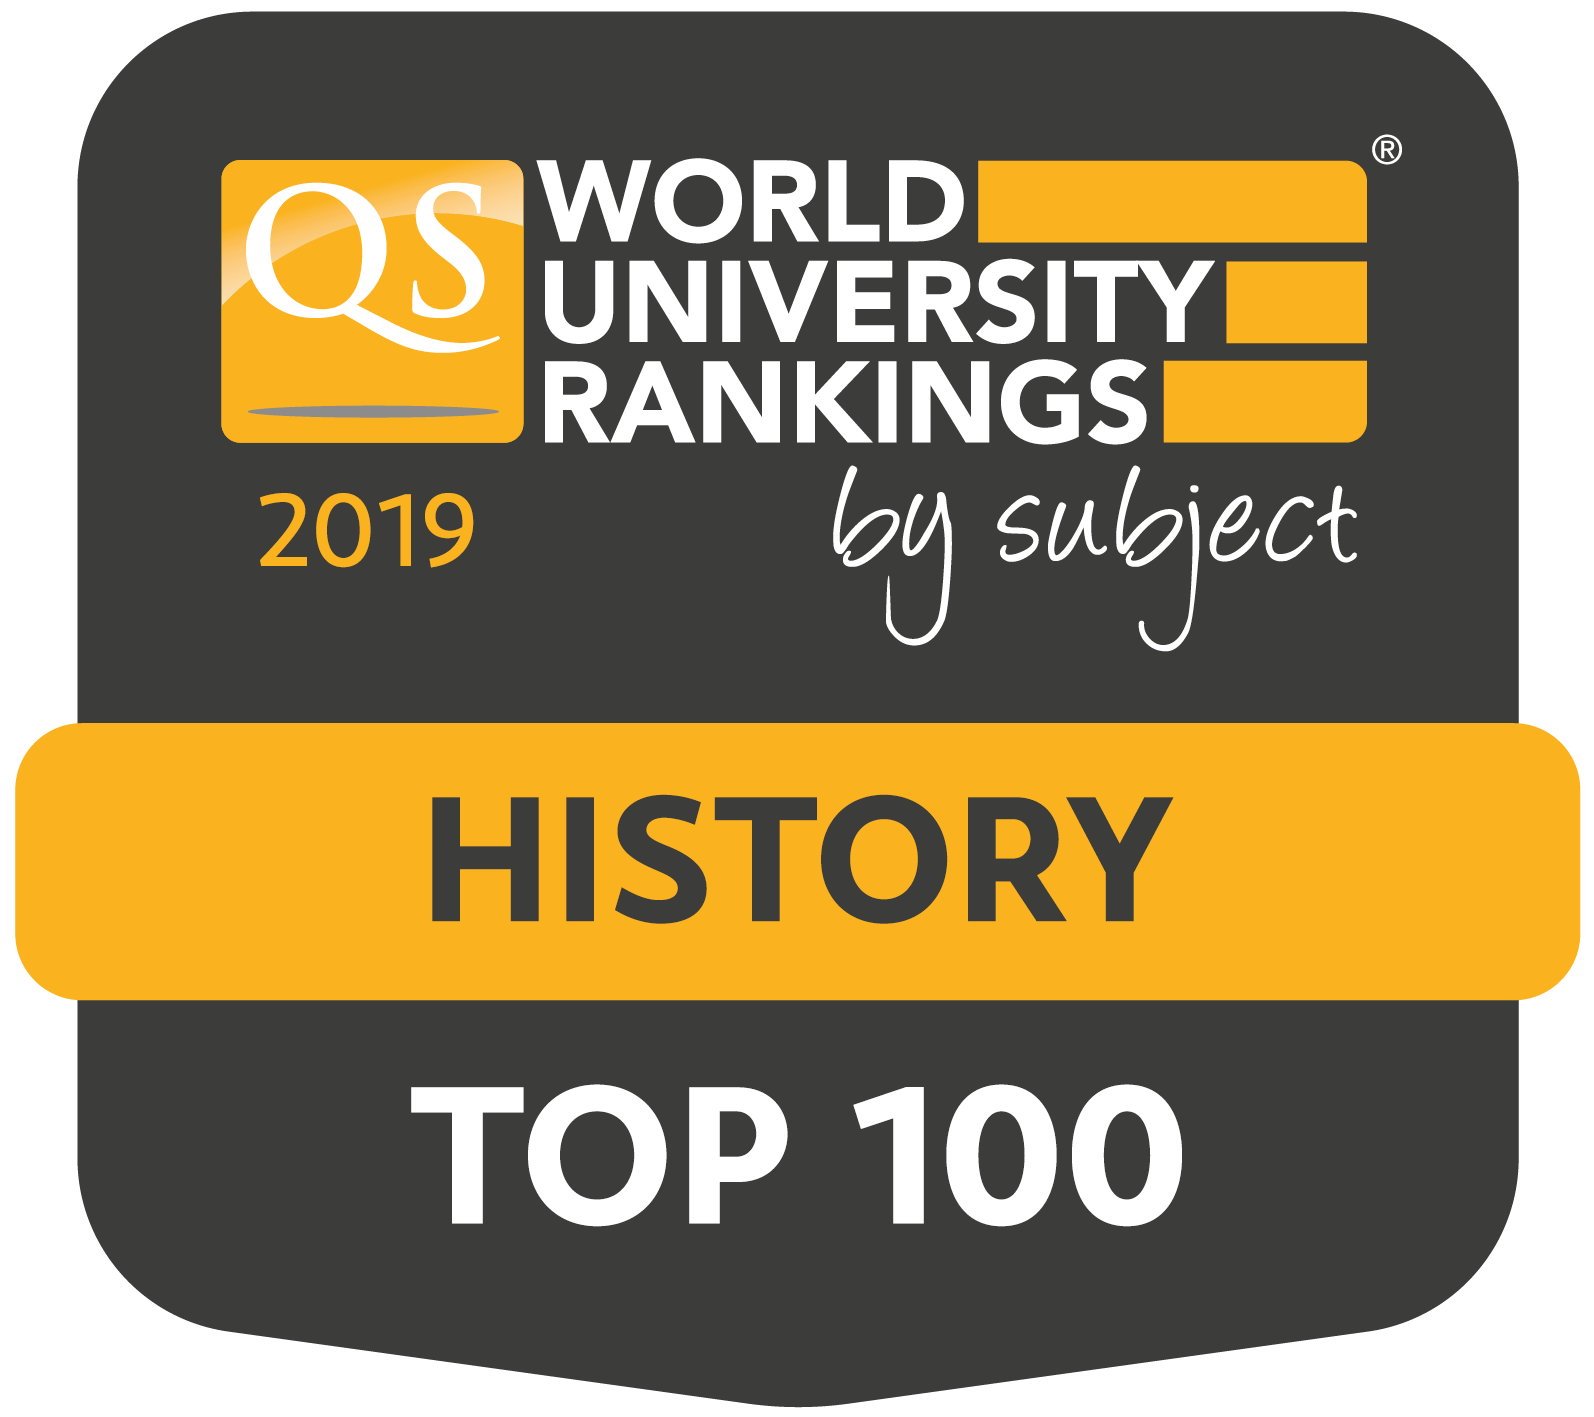 QS by subject. QS by subject rankings” logo. World University rankings by subject. QS World rankings logo.